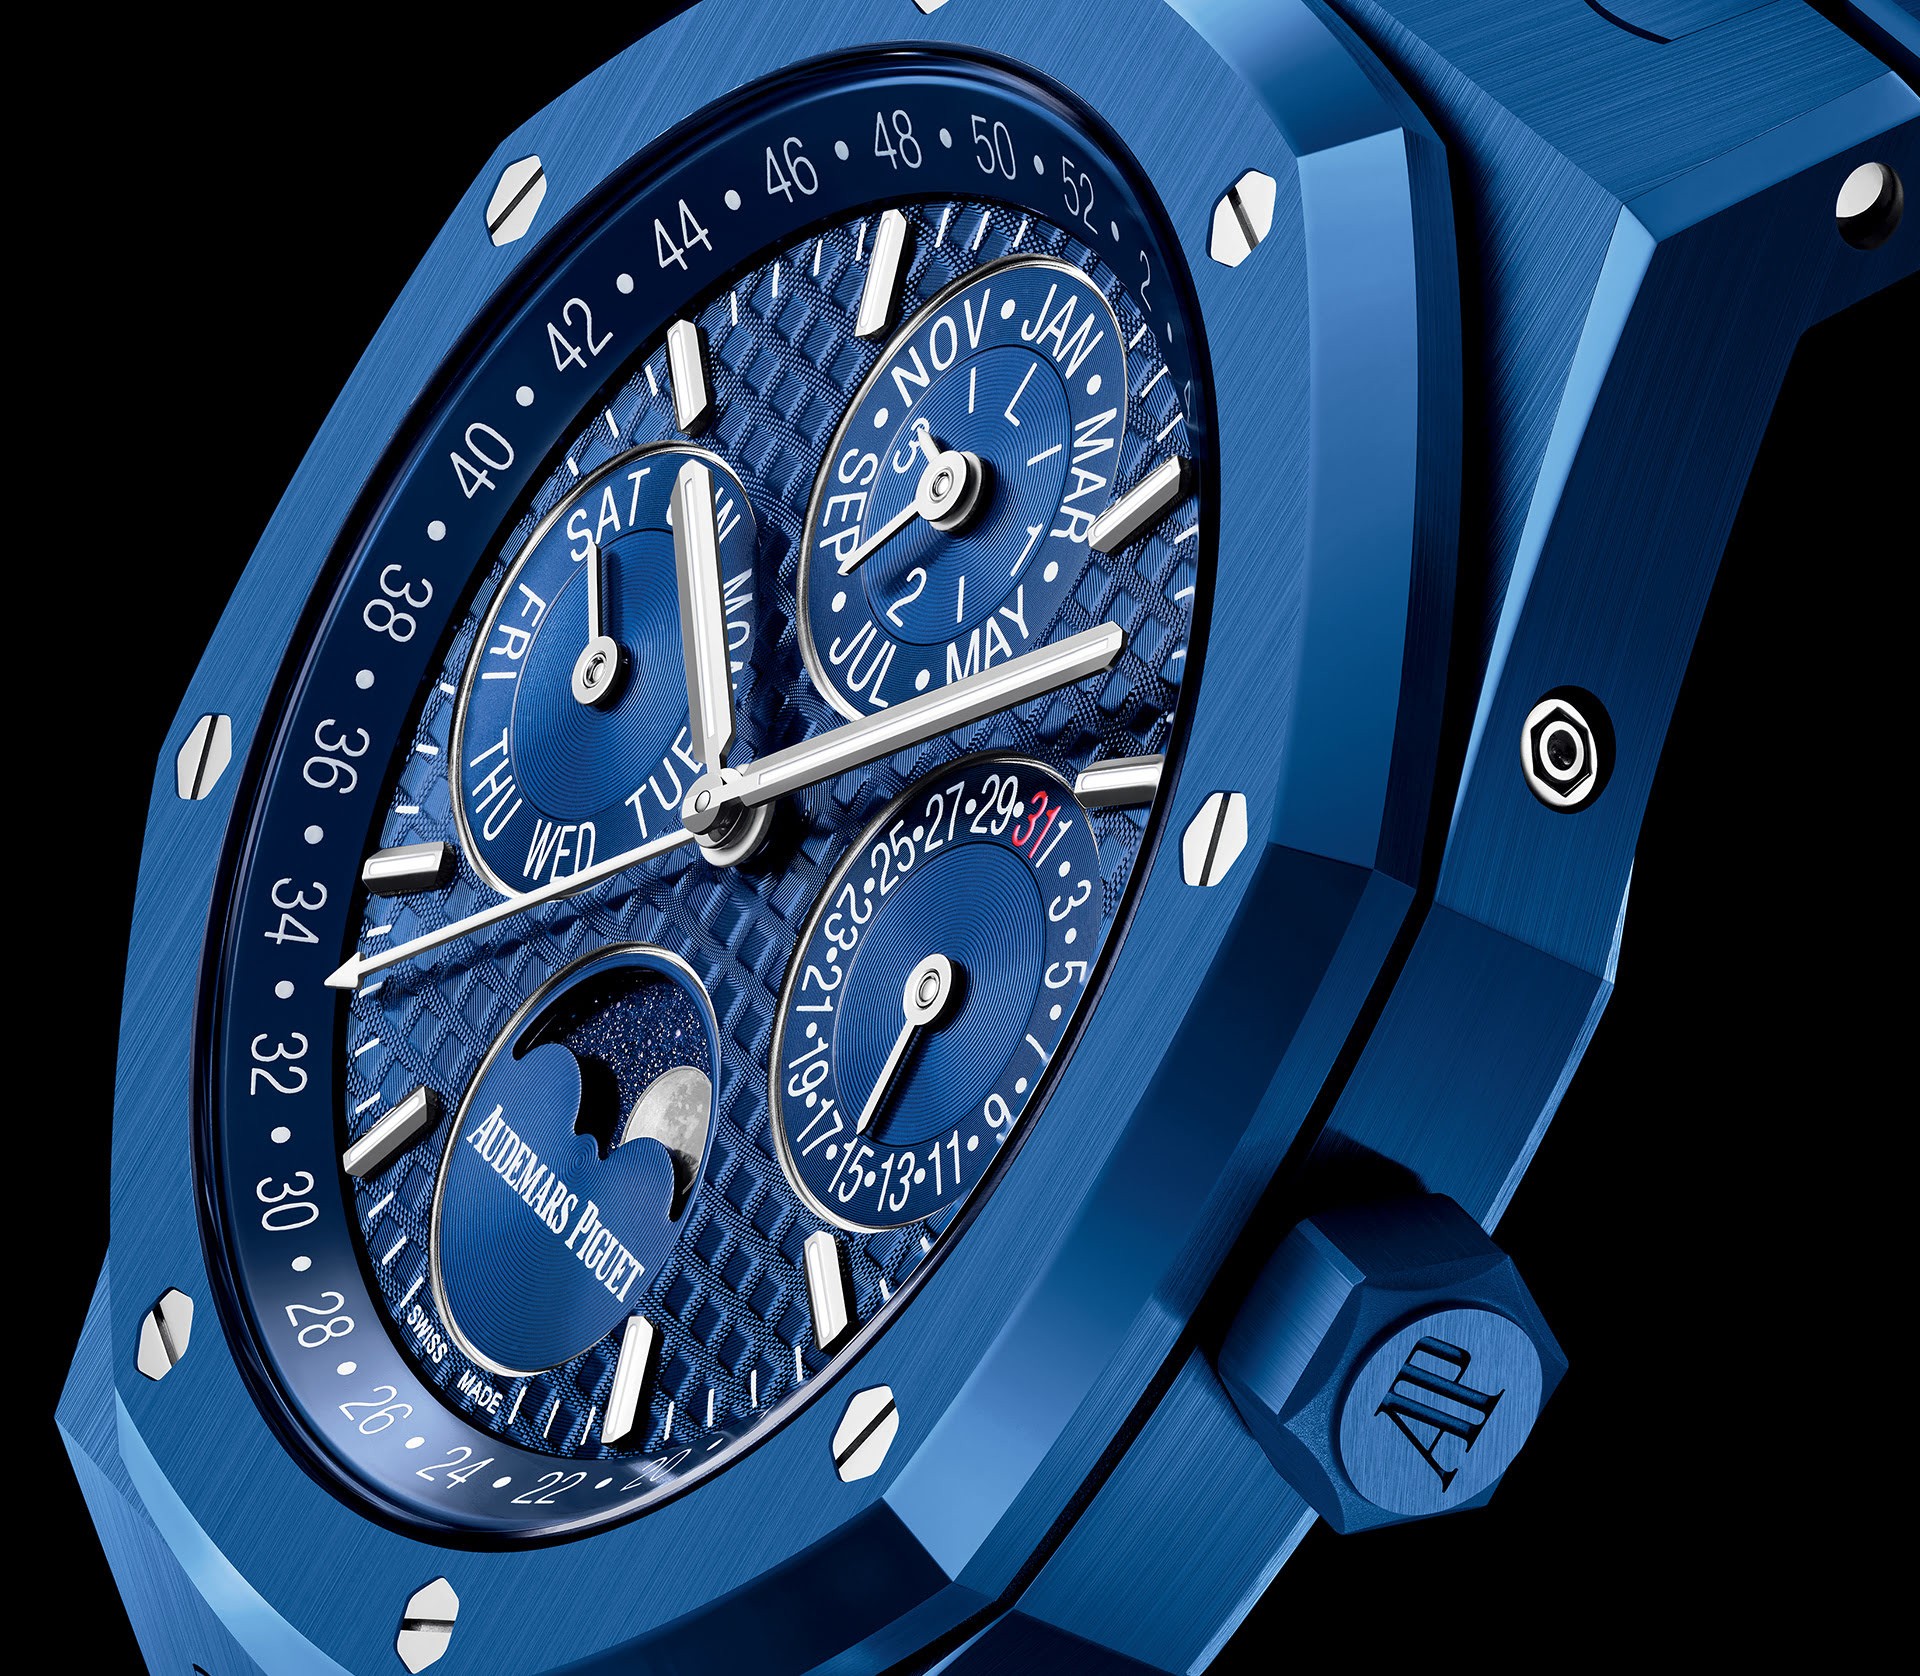 Audemars Piguet Logo and symbol, meaning, history, PNG, brand